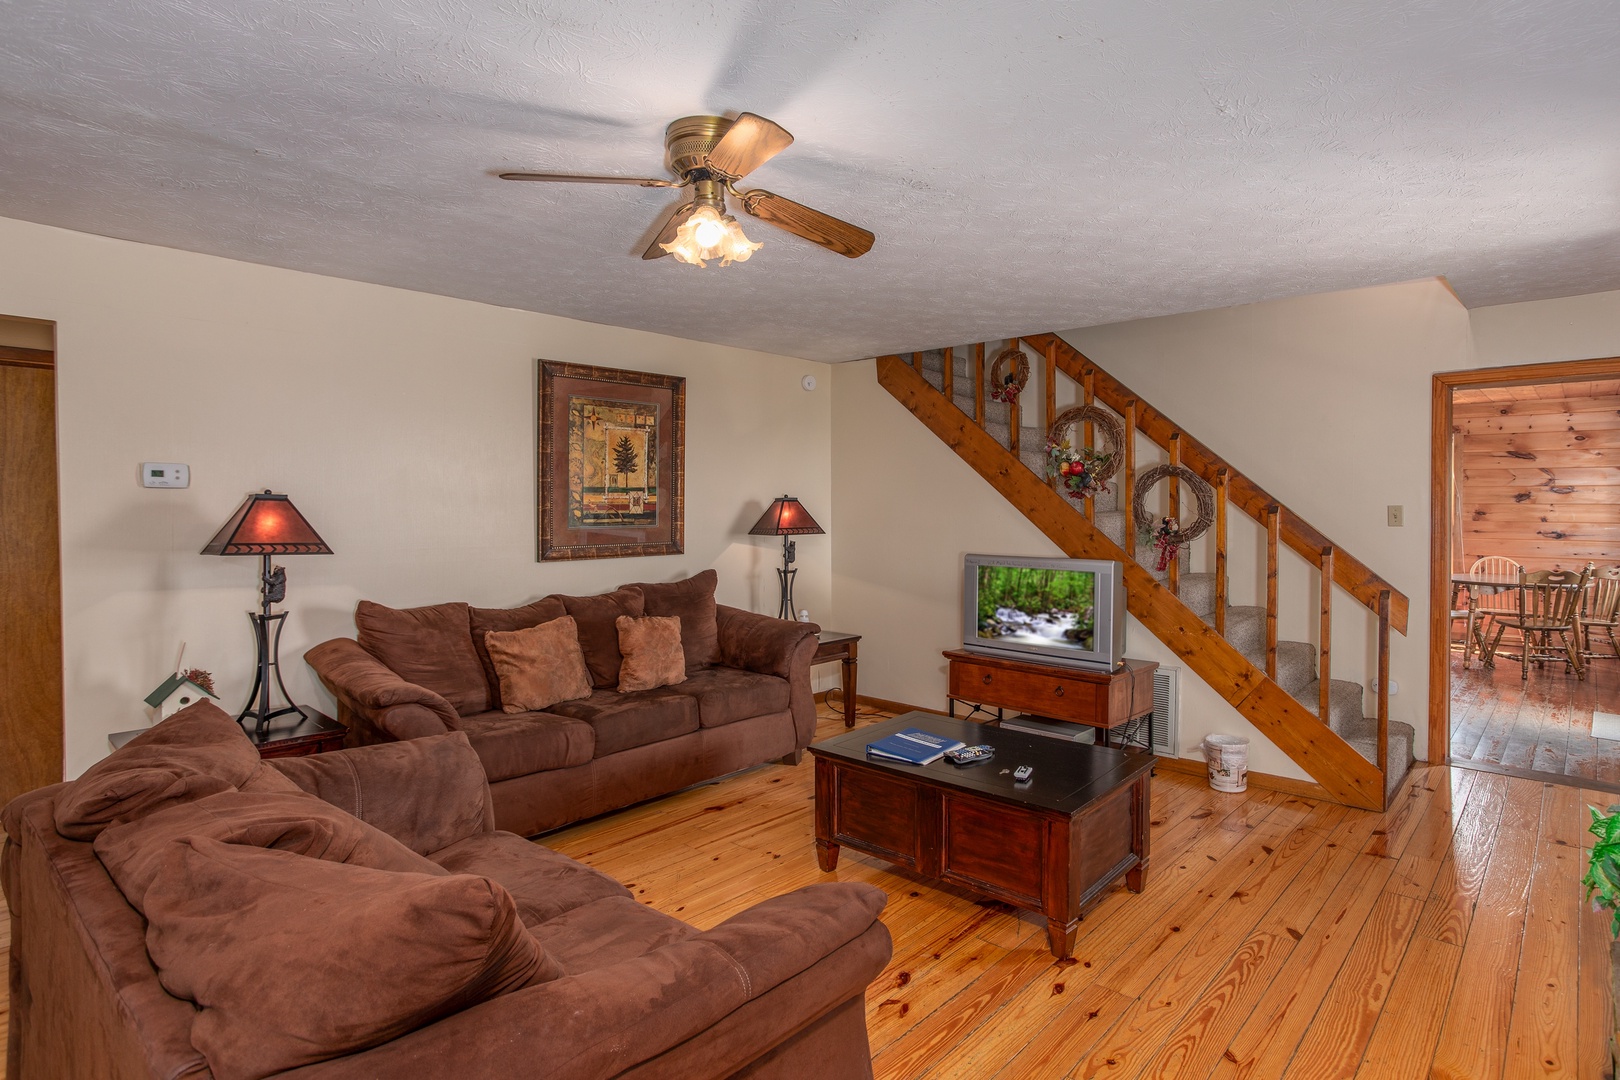 Living room with a sofa and loveseat at Black Bear Ridge, a 3-bedroom cabin rental located in Pigeon Forge